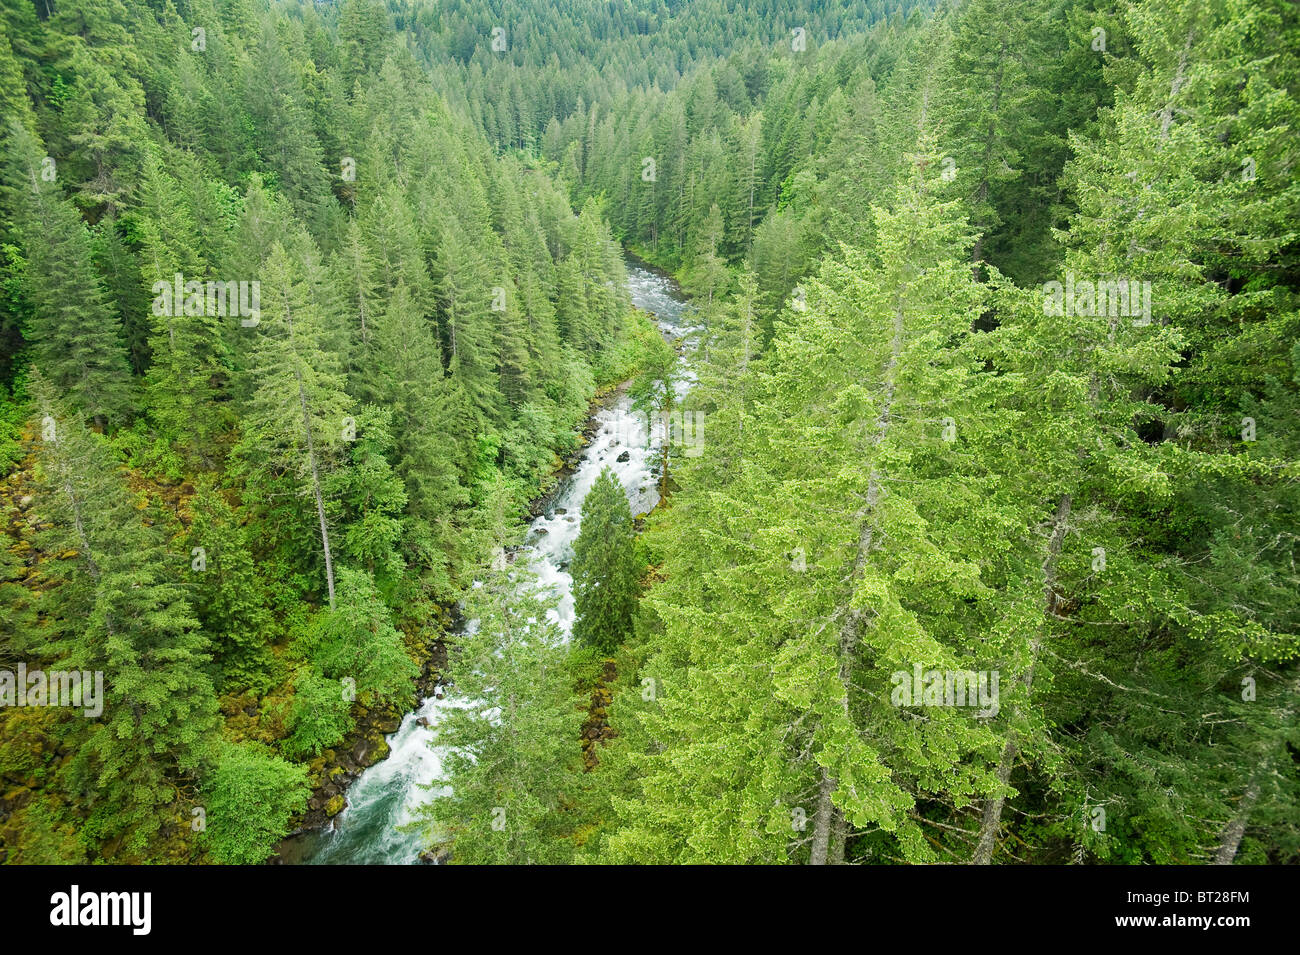 Evergreen Forest, Wind River Gorge, Gifford Pinchot National Forest, Washington USA Stock Photo